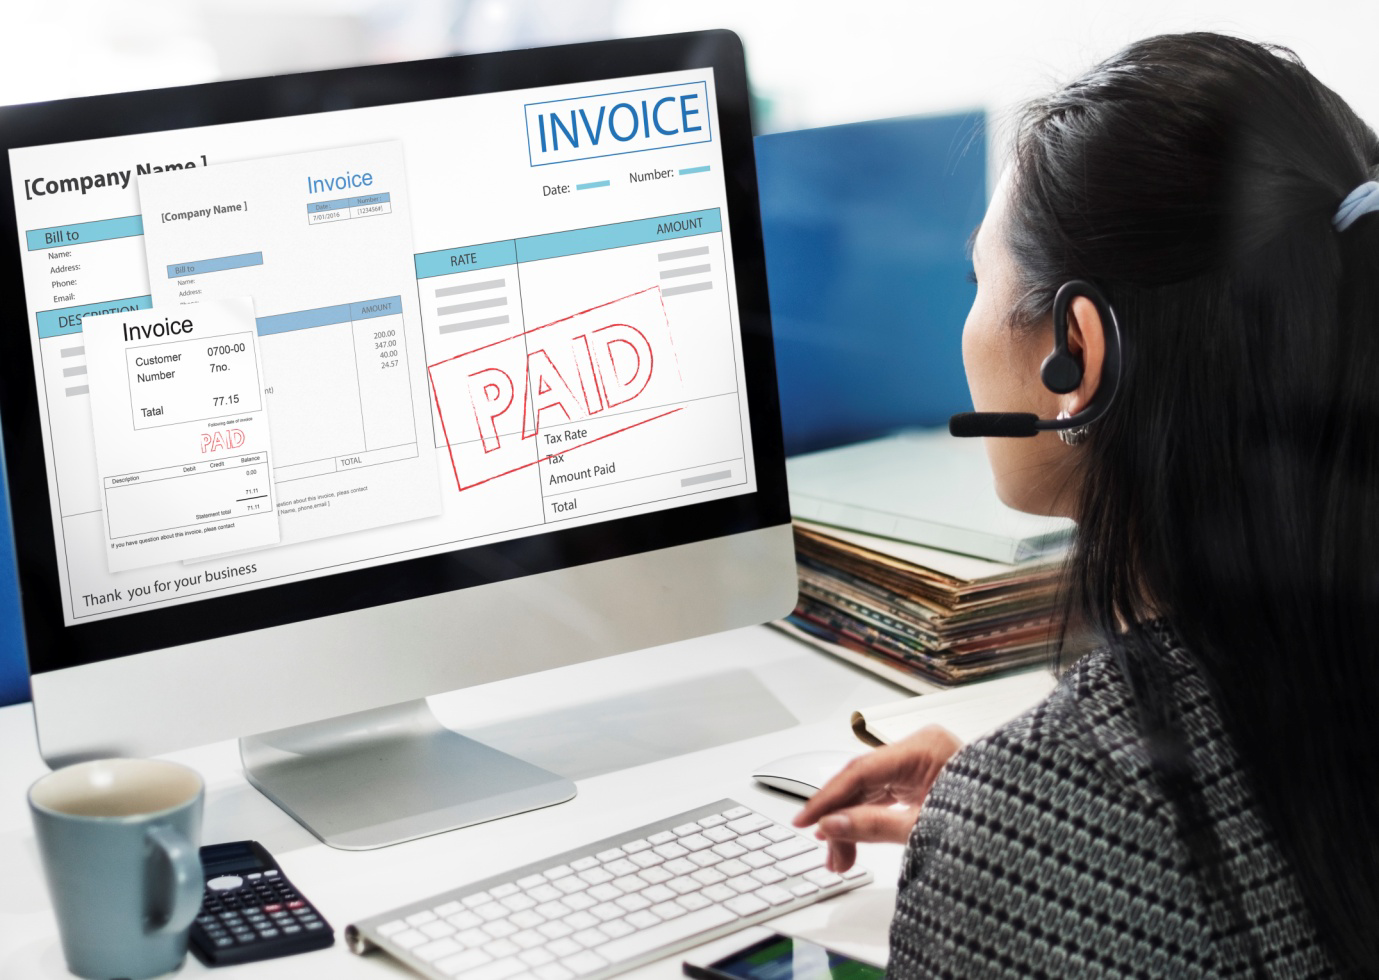 invoice-bill-paid-payment-financial-account-concept.jpg